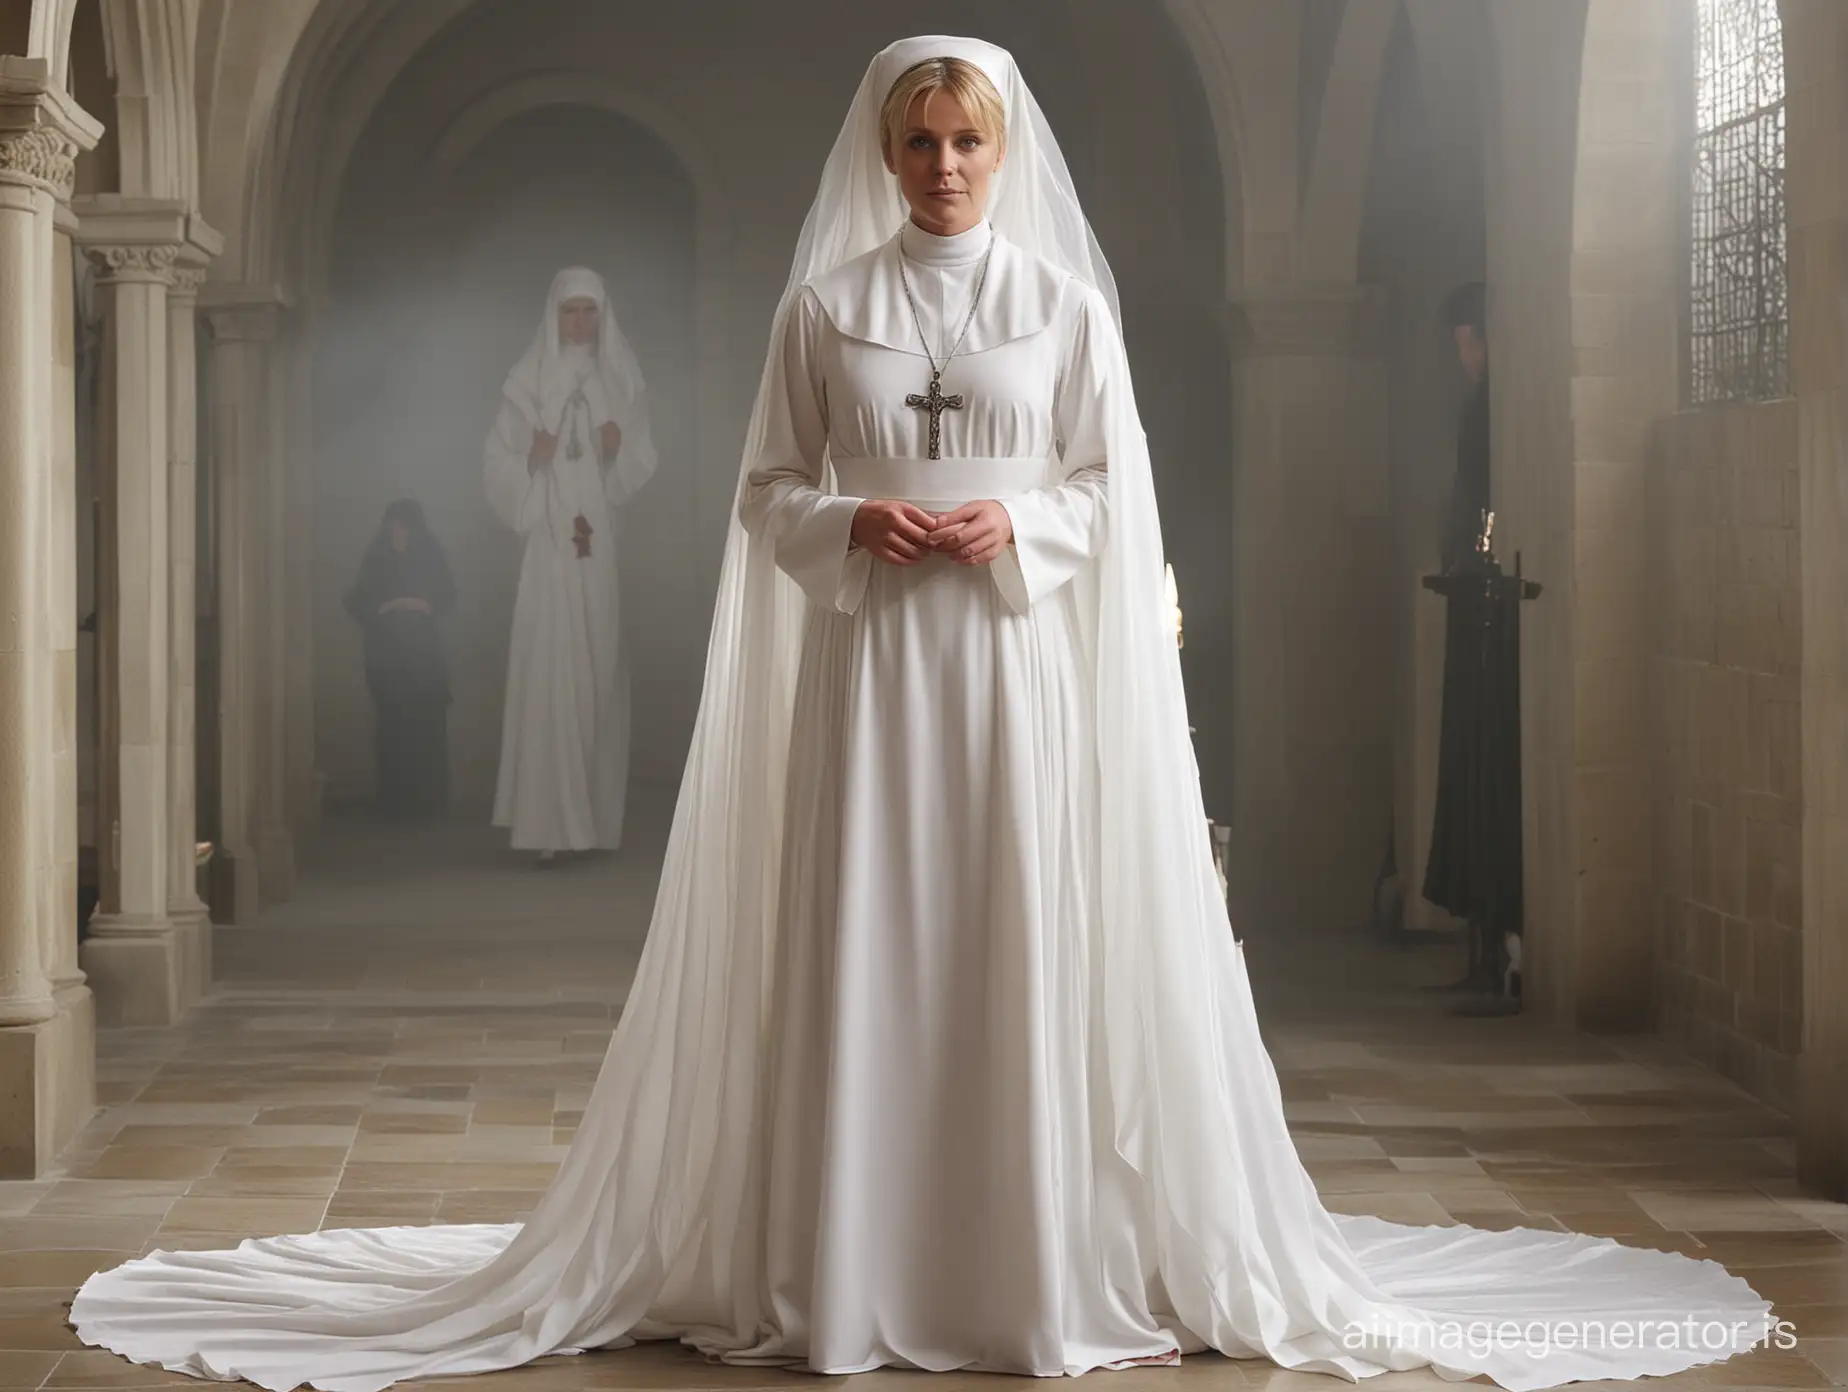 Amanda-Tapping-Hypnotized-in-Traditional-Nun-Habit-by-an-Old-Abbess